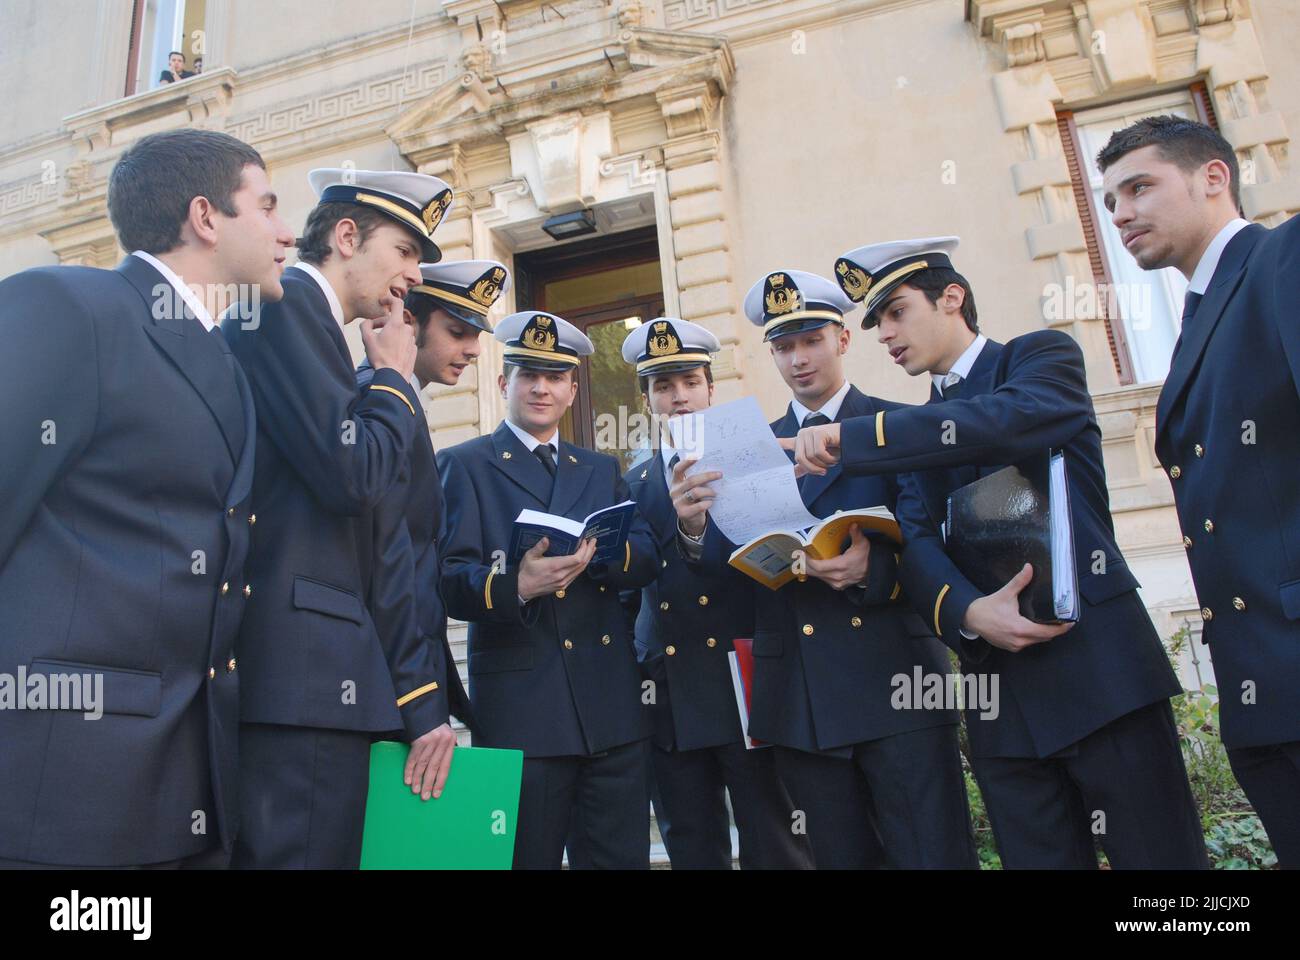 Genoa (Italy), Academy of the Merchant Navy, advanced specialization school for the professions of the sea; Stock Photo